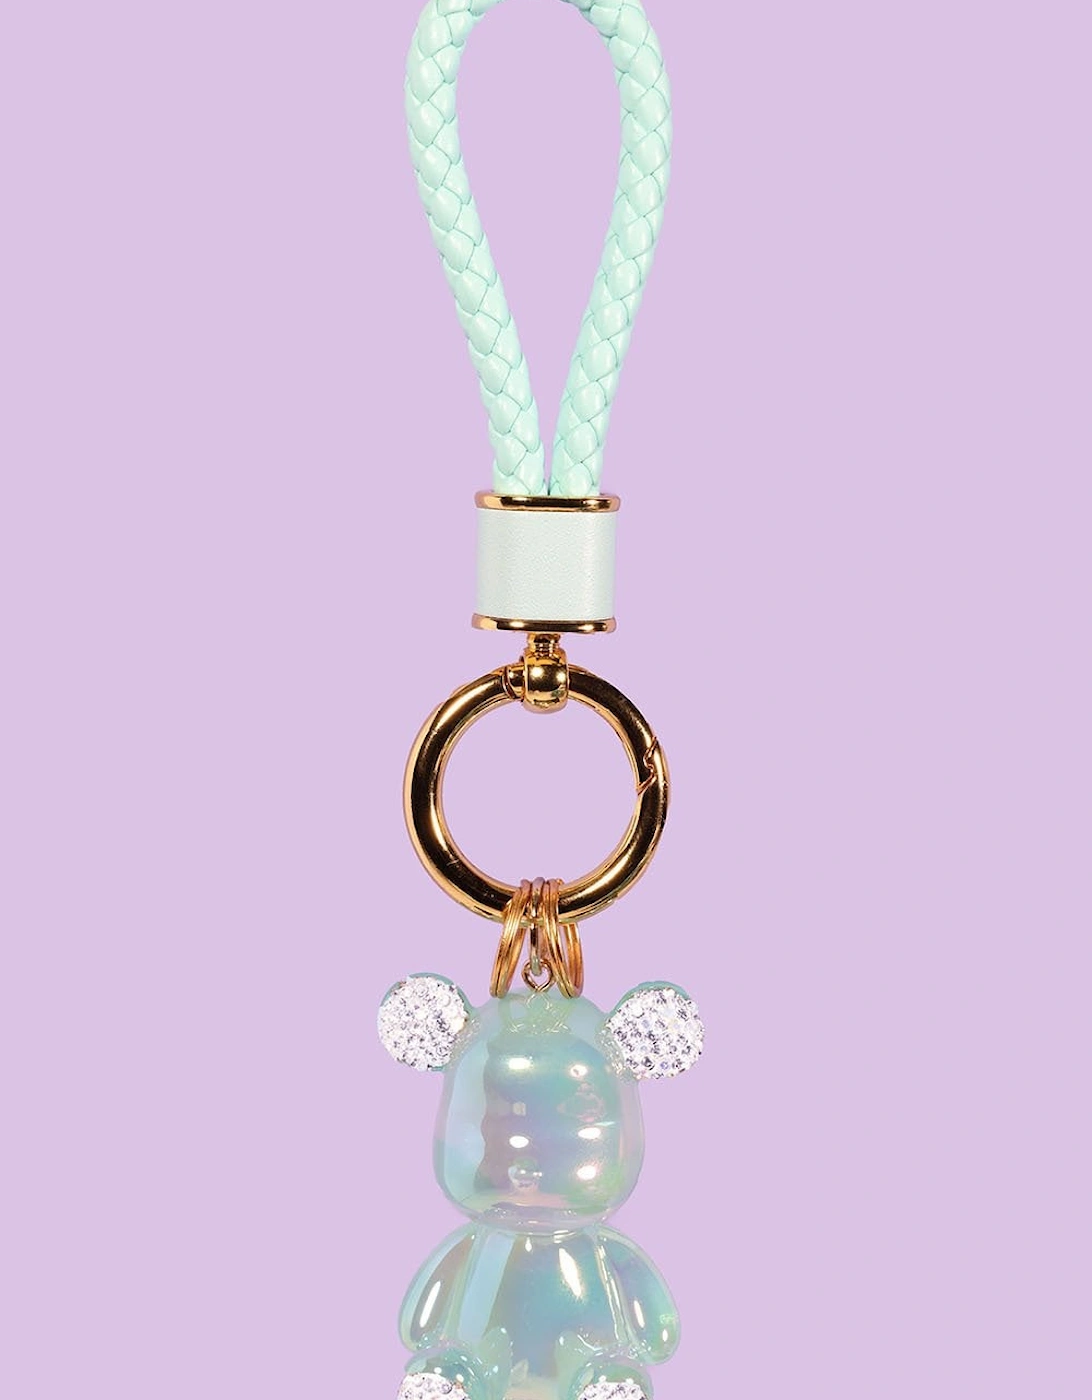 Hard Teddy Keyring with DiamantÃ© Detail, 2 of 1